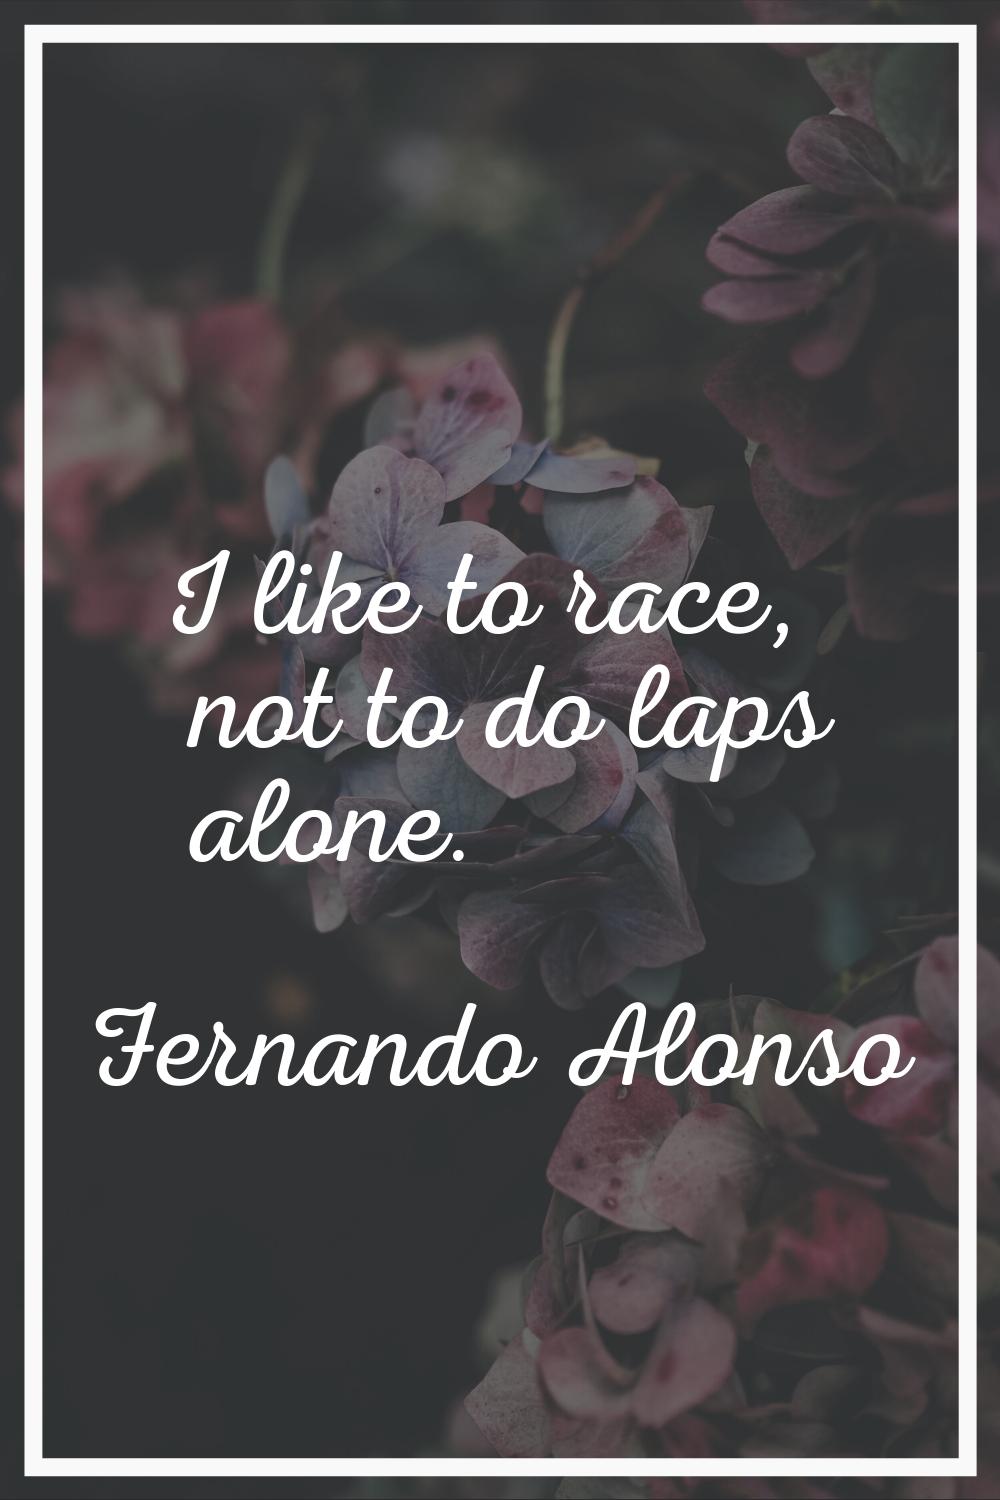 I like to race, not to do laps alone.